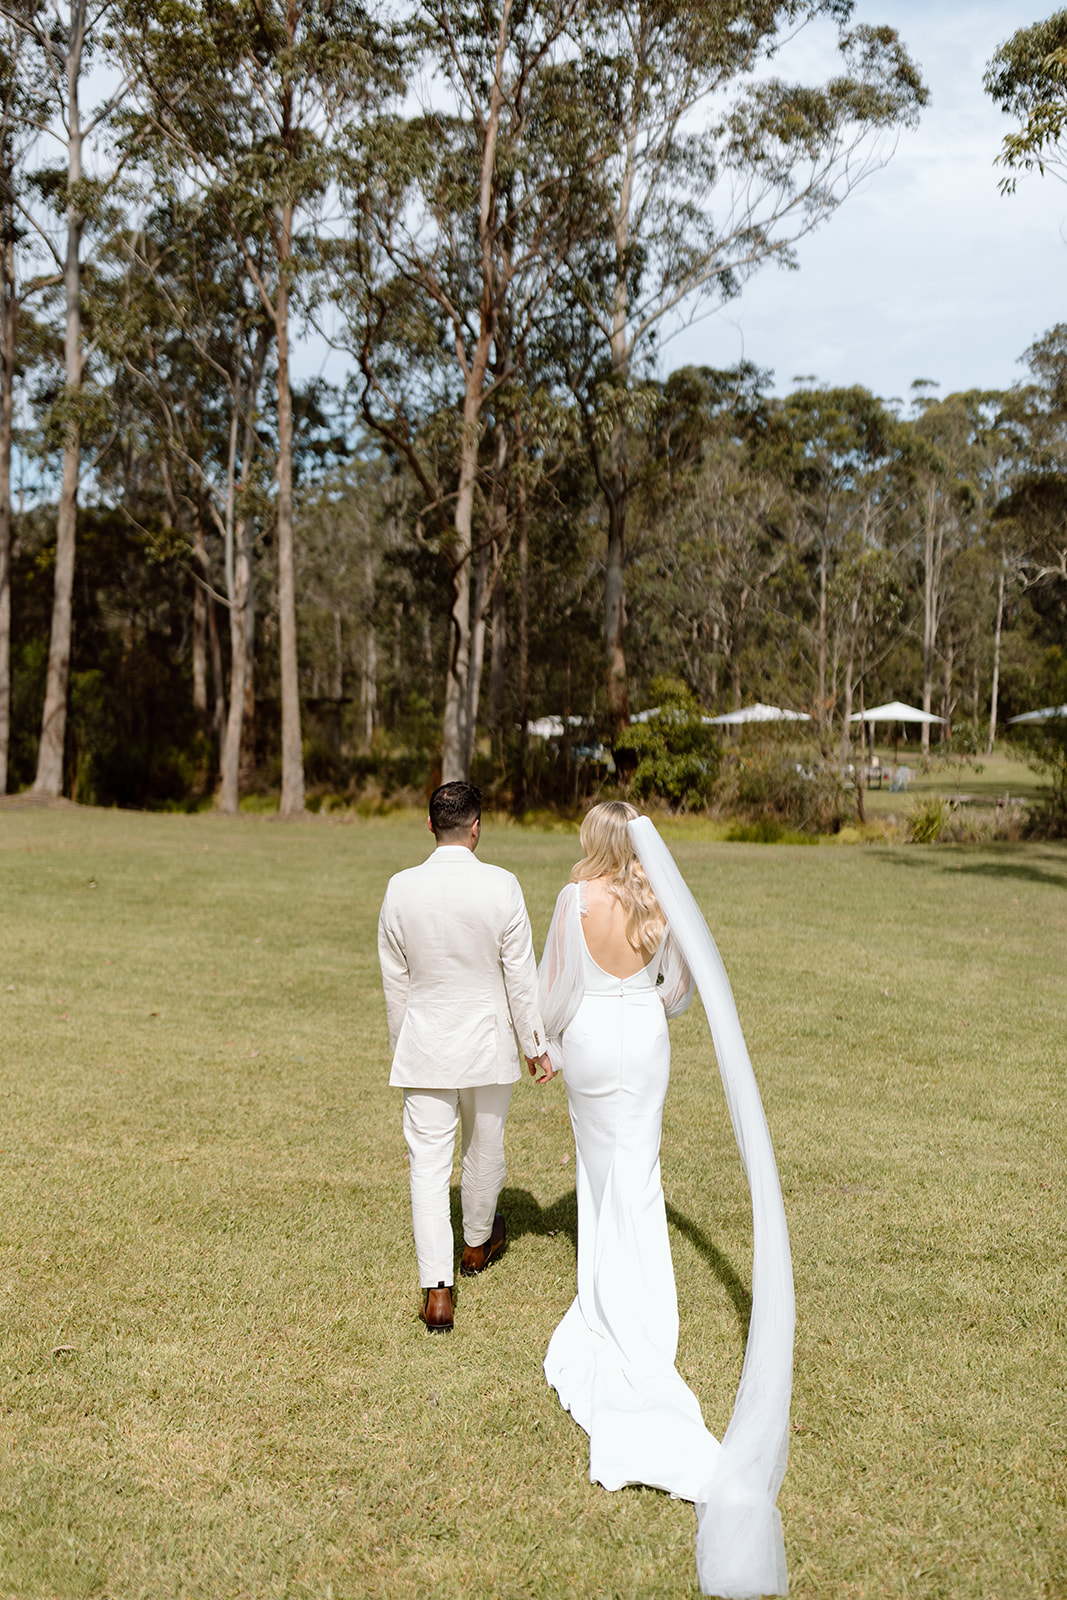 Wedding ceremony in the South Coast Bawley Vale Estate